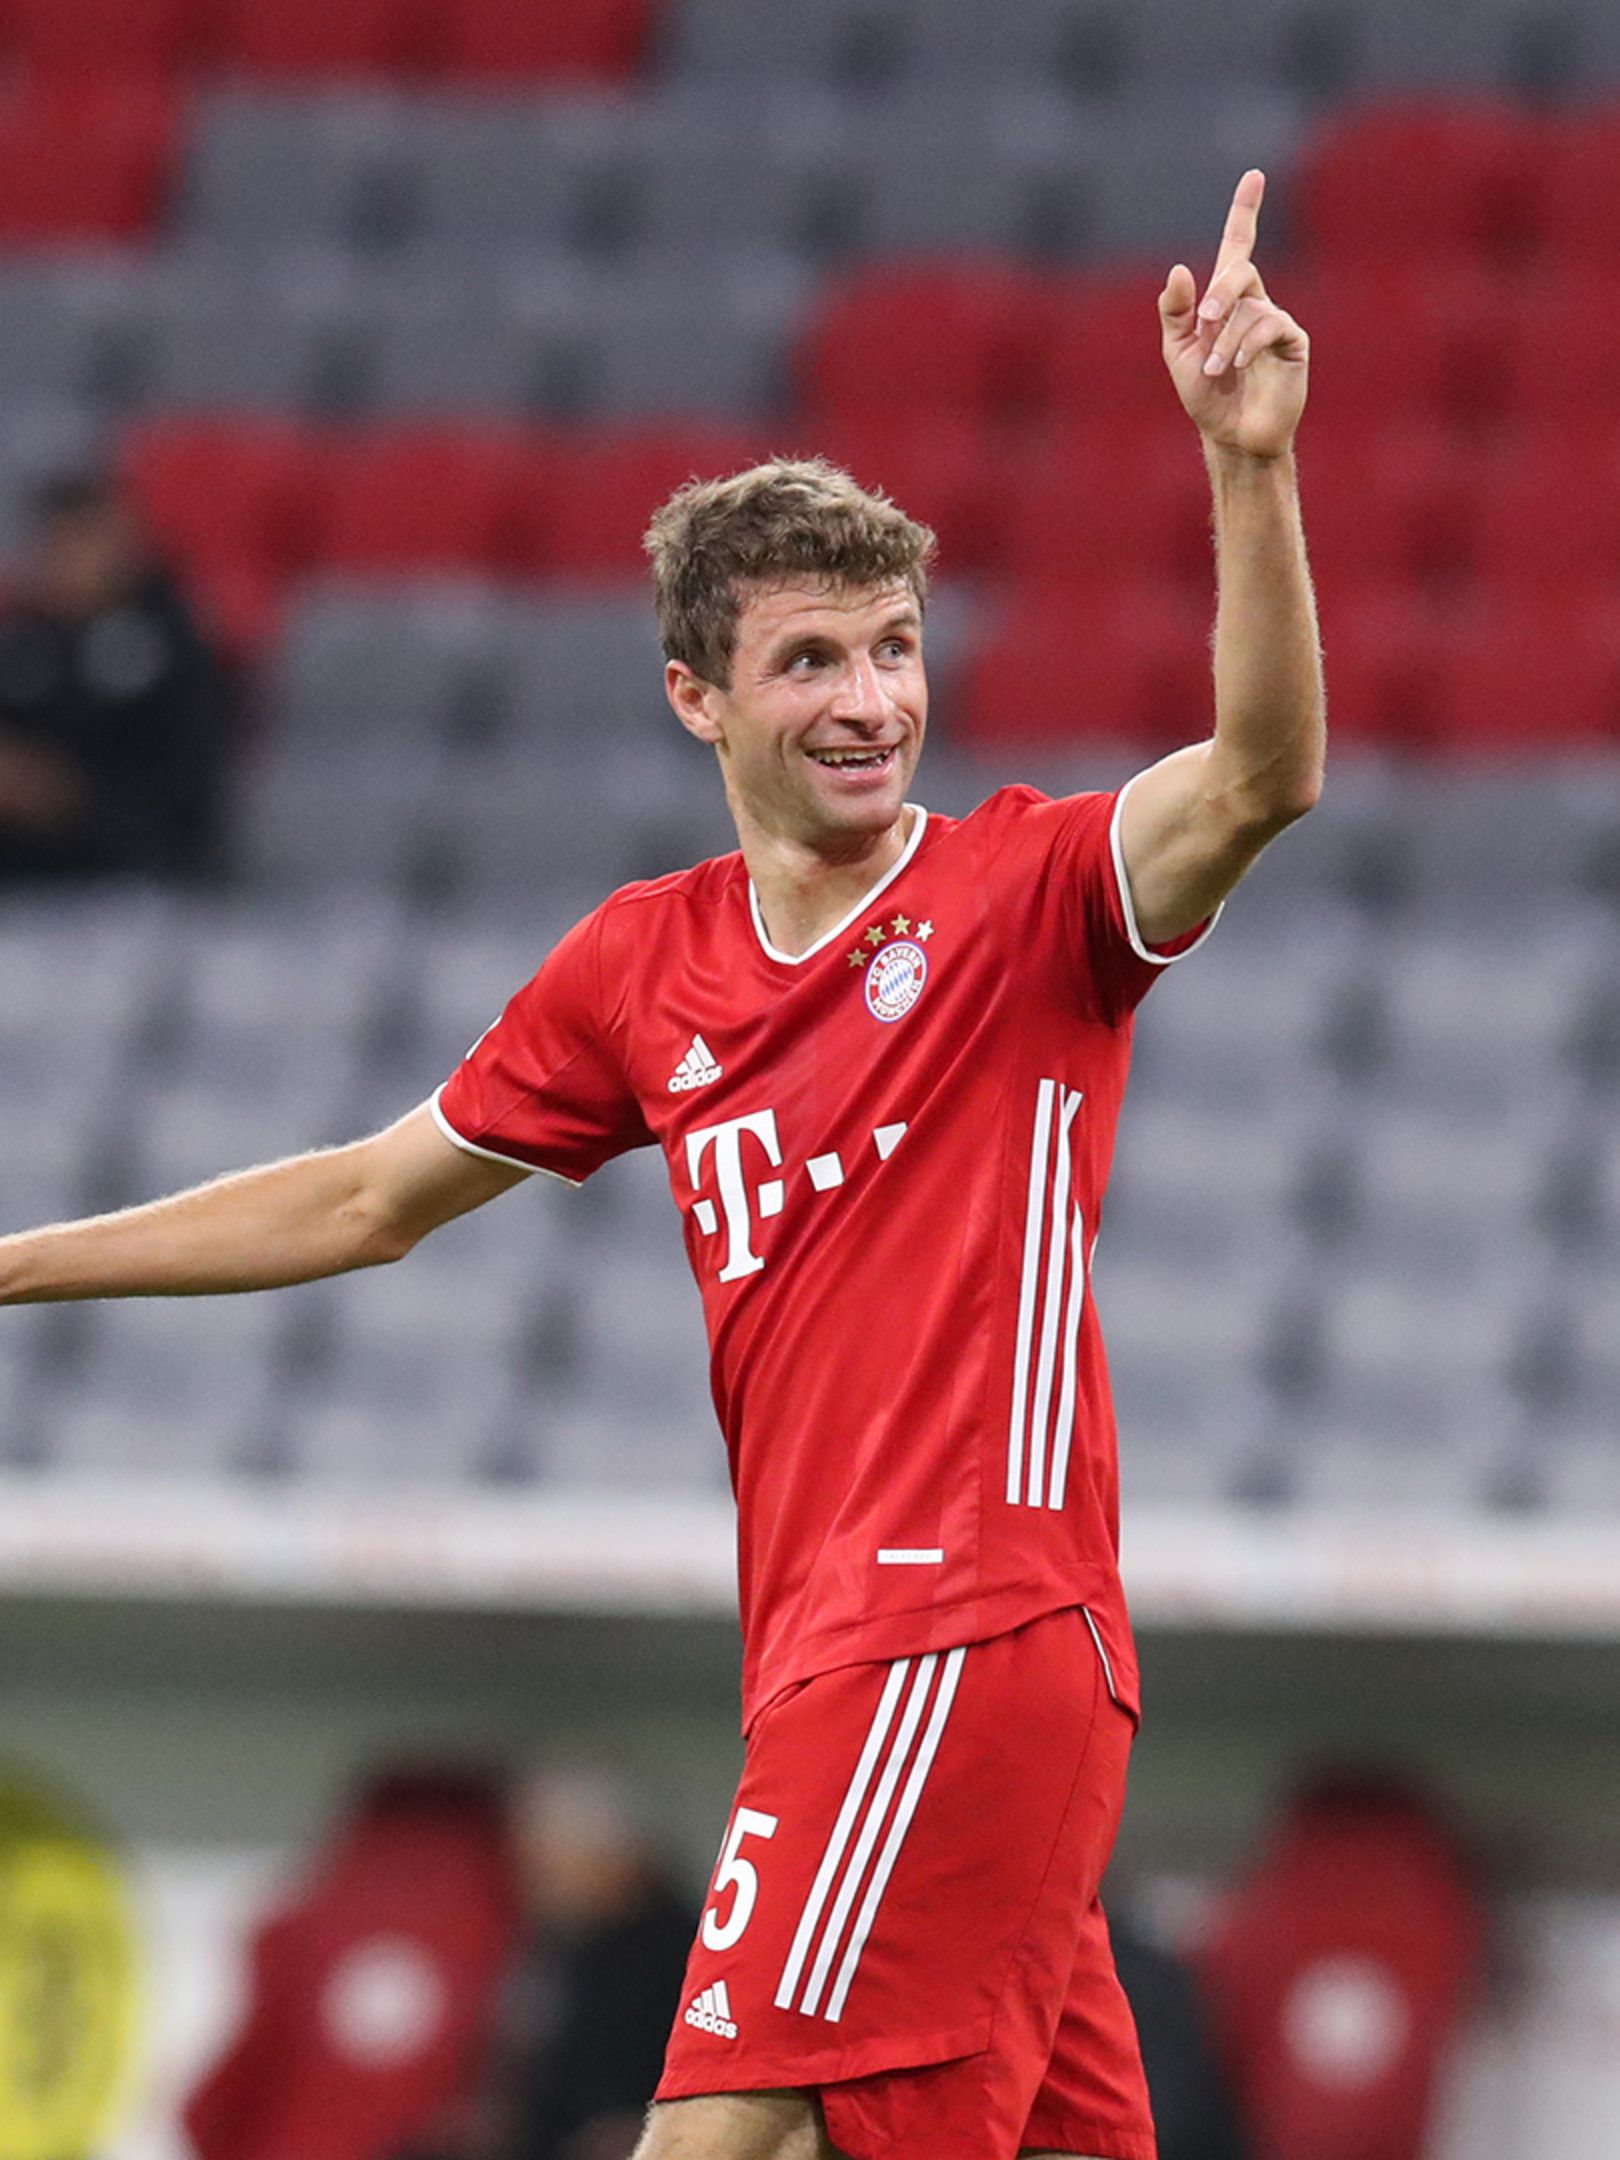 Supercup record for Thomas Müller